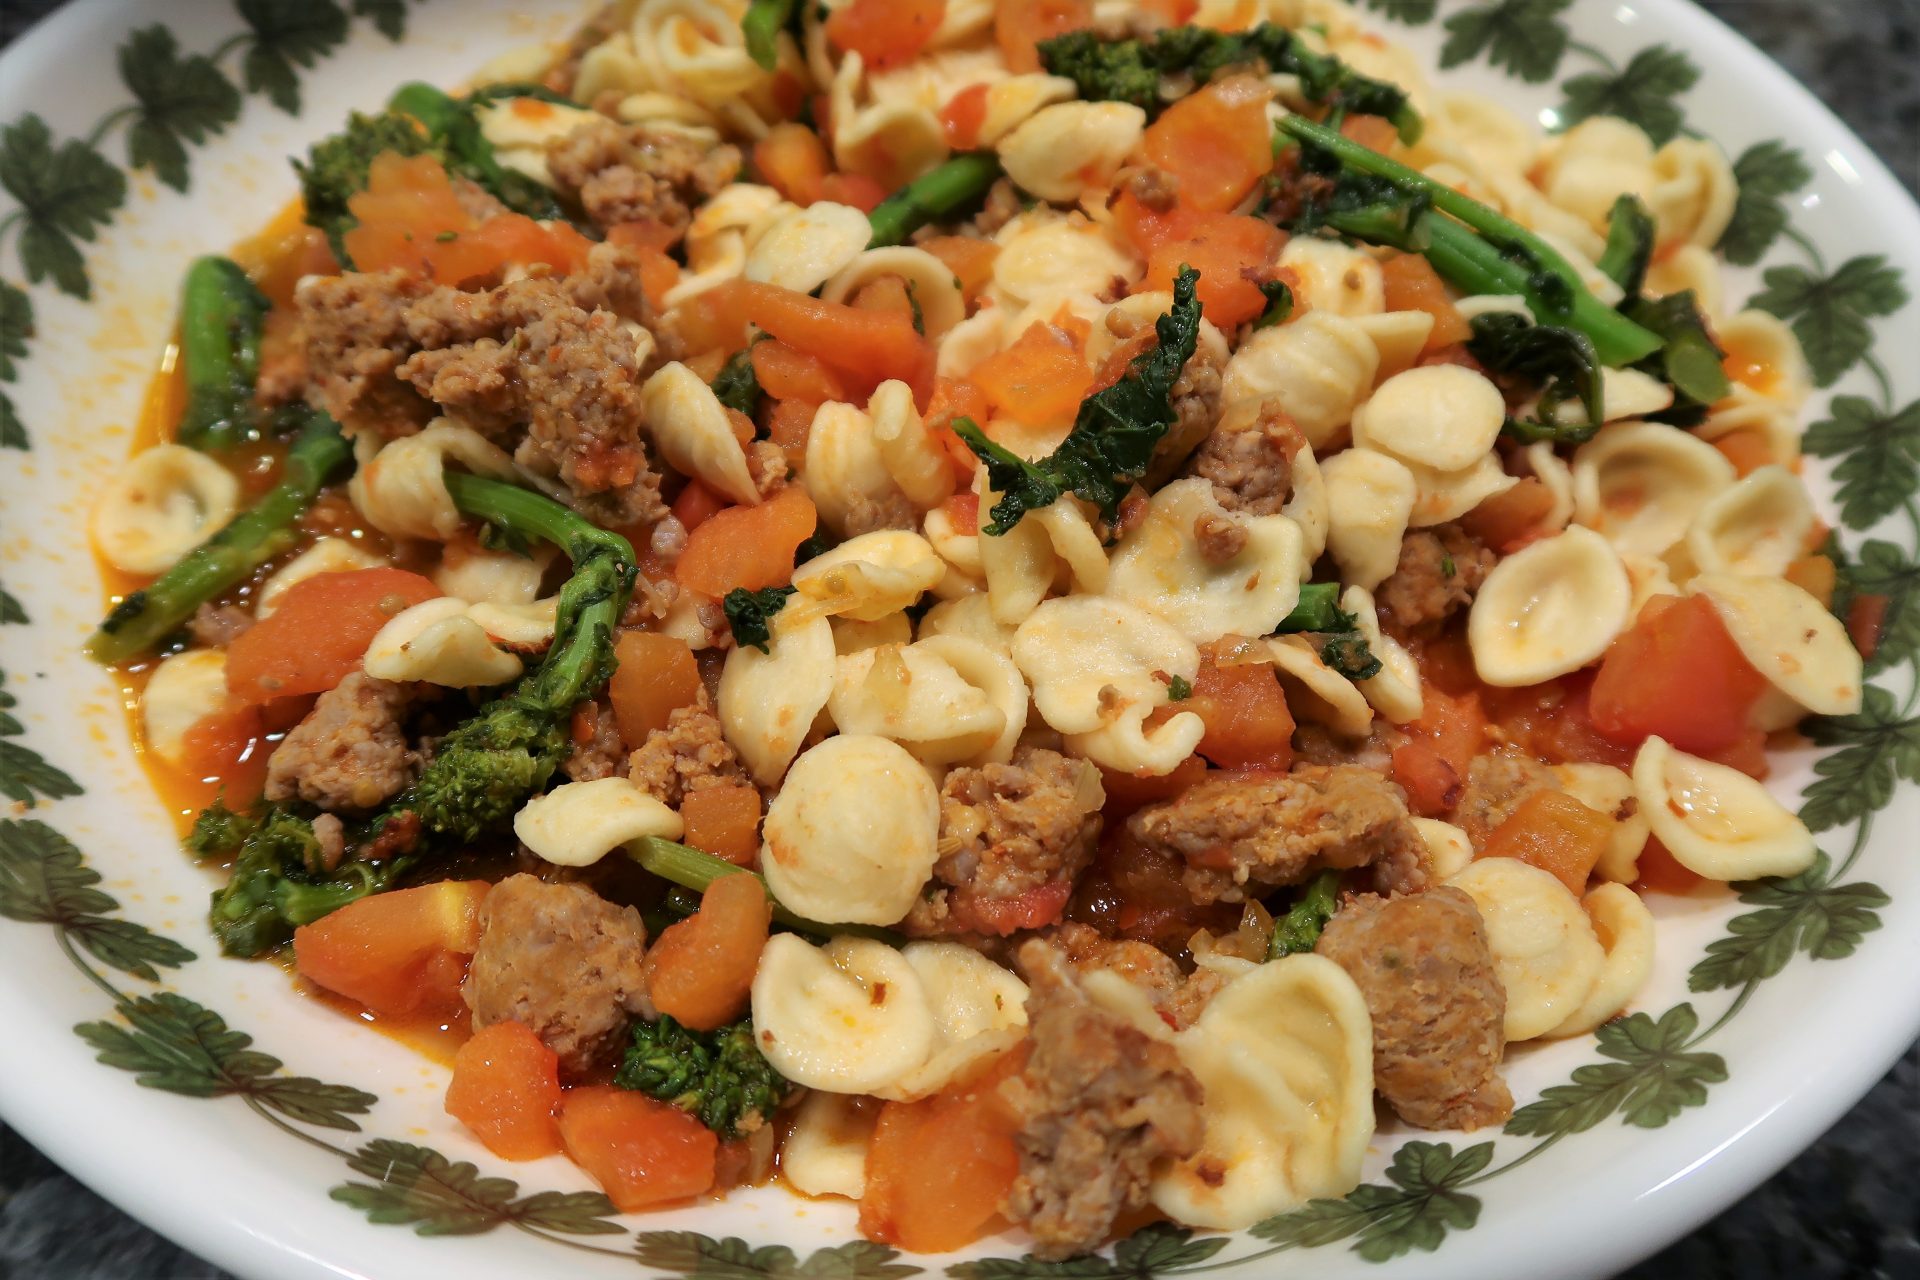 Pasta with Broccoli Rabe and Sausage Recipe